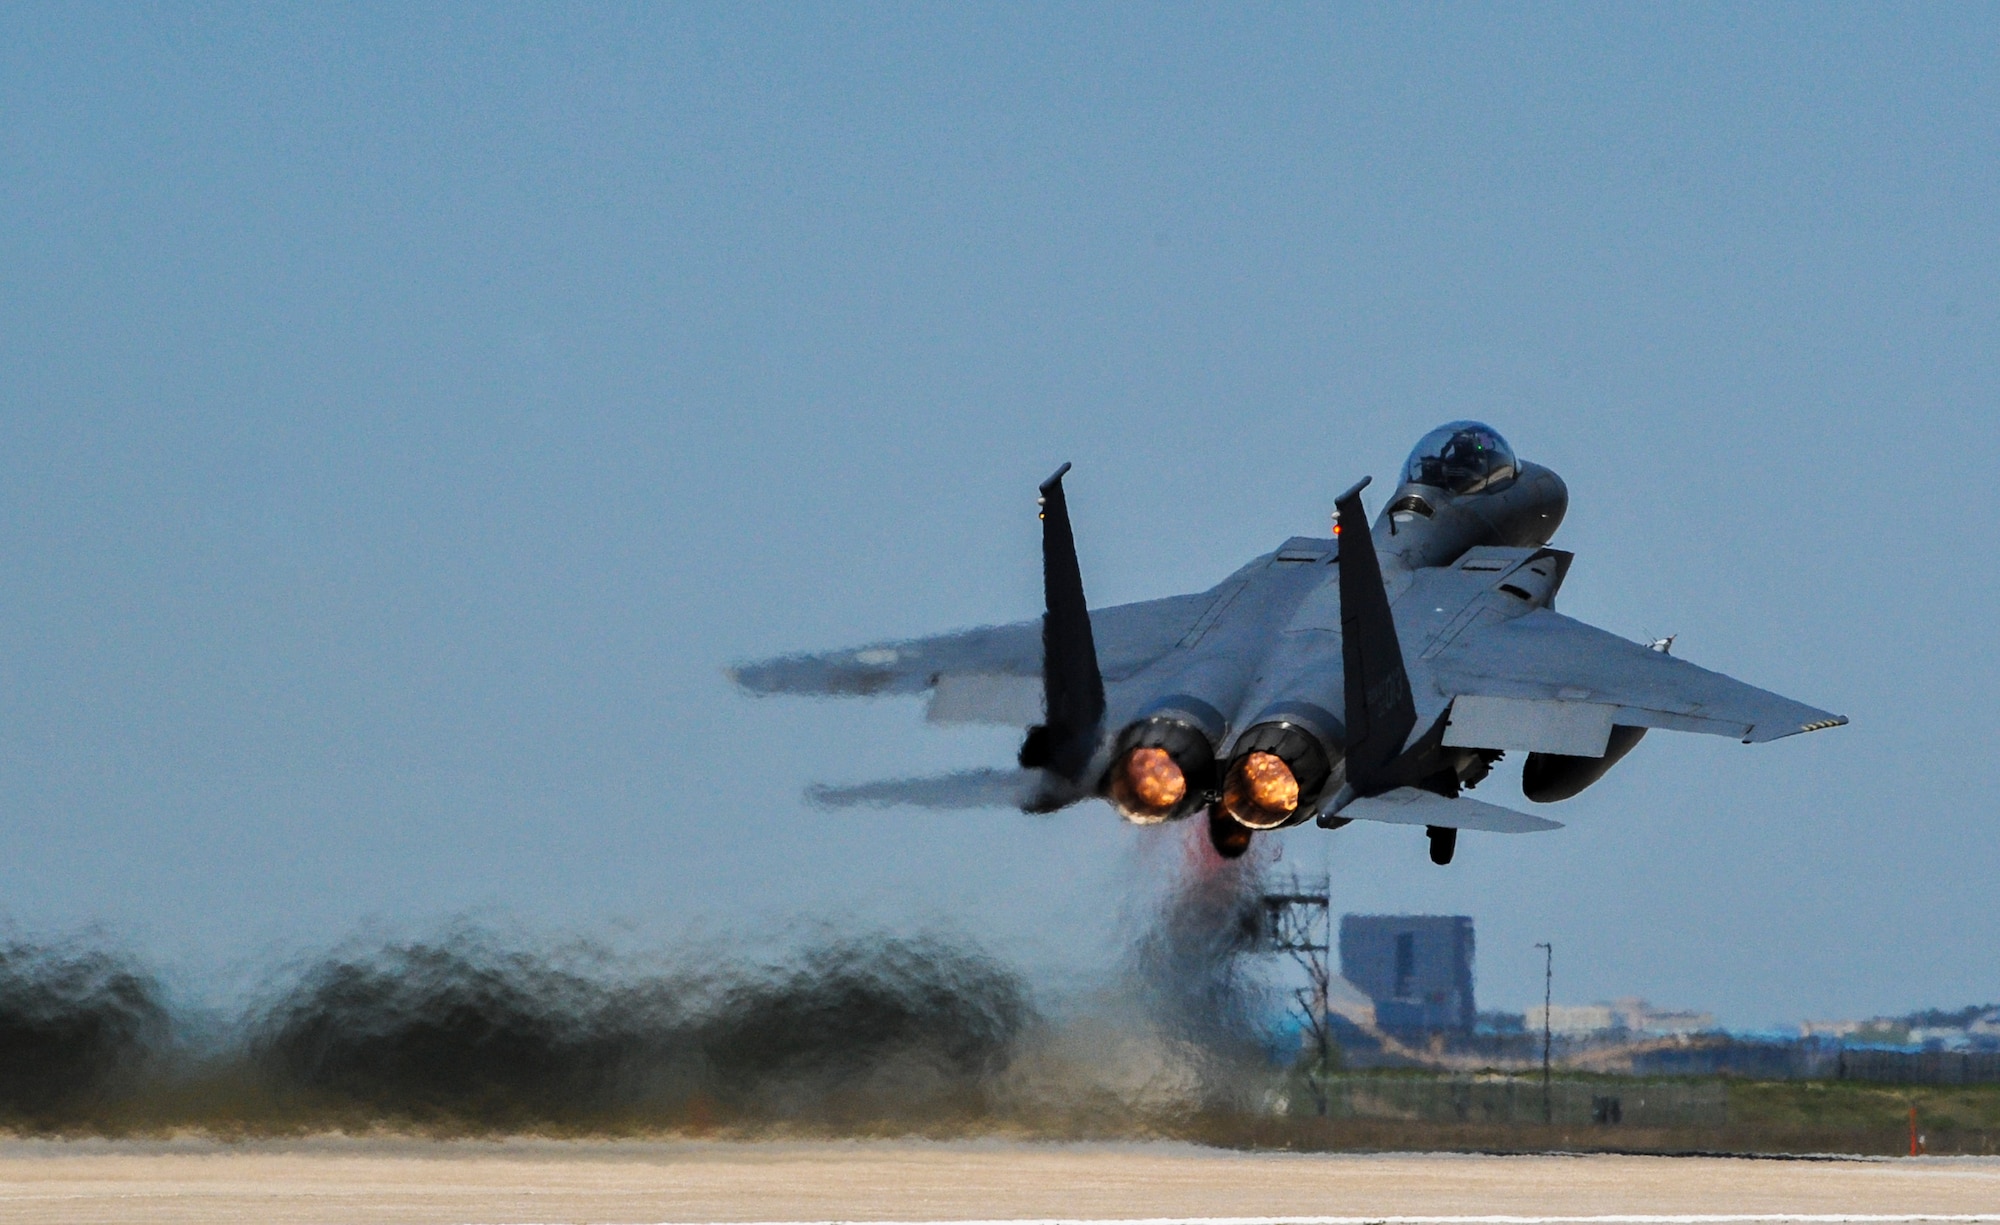 A Republic of Korea Air Force F-15K Slam Eagles from the 11th Fighter Squadron, Daegu Air Base, ROK, takes off during Exercise MAX THUNDER 17 at Kunsan Air Base, Republic of Korea, April 27, 2017. In Max Thunder, U.S. and ROK air forces consistently train together to be ready around-the-clock to defend the Republic of Korea. The interoperability and trust developed between the allies in training is critical to ensure U.S. and ROK are prepared for any challenge. (U.S. Air Force photo by Senior Airman Colville McFee/Released)